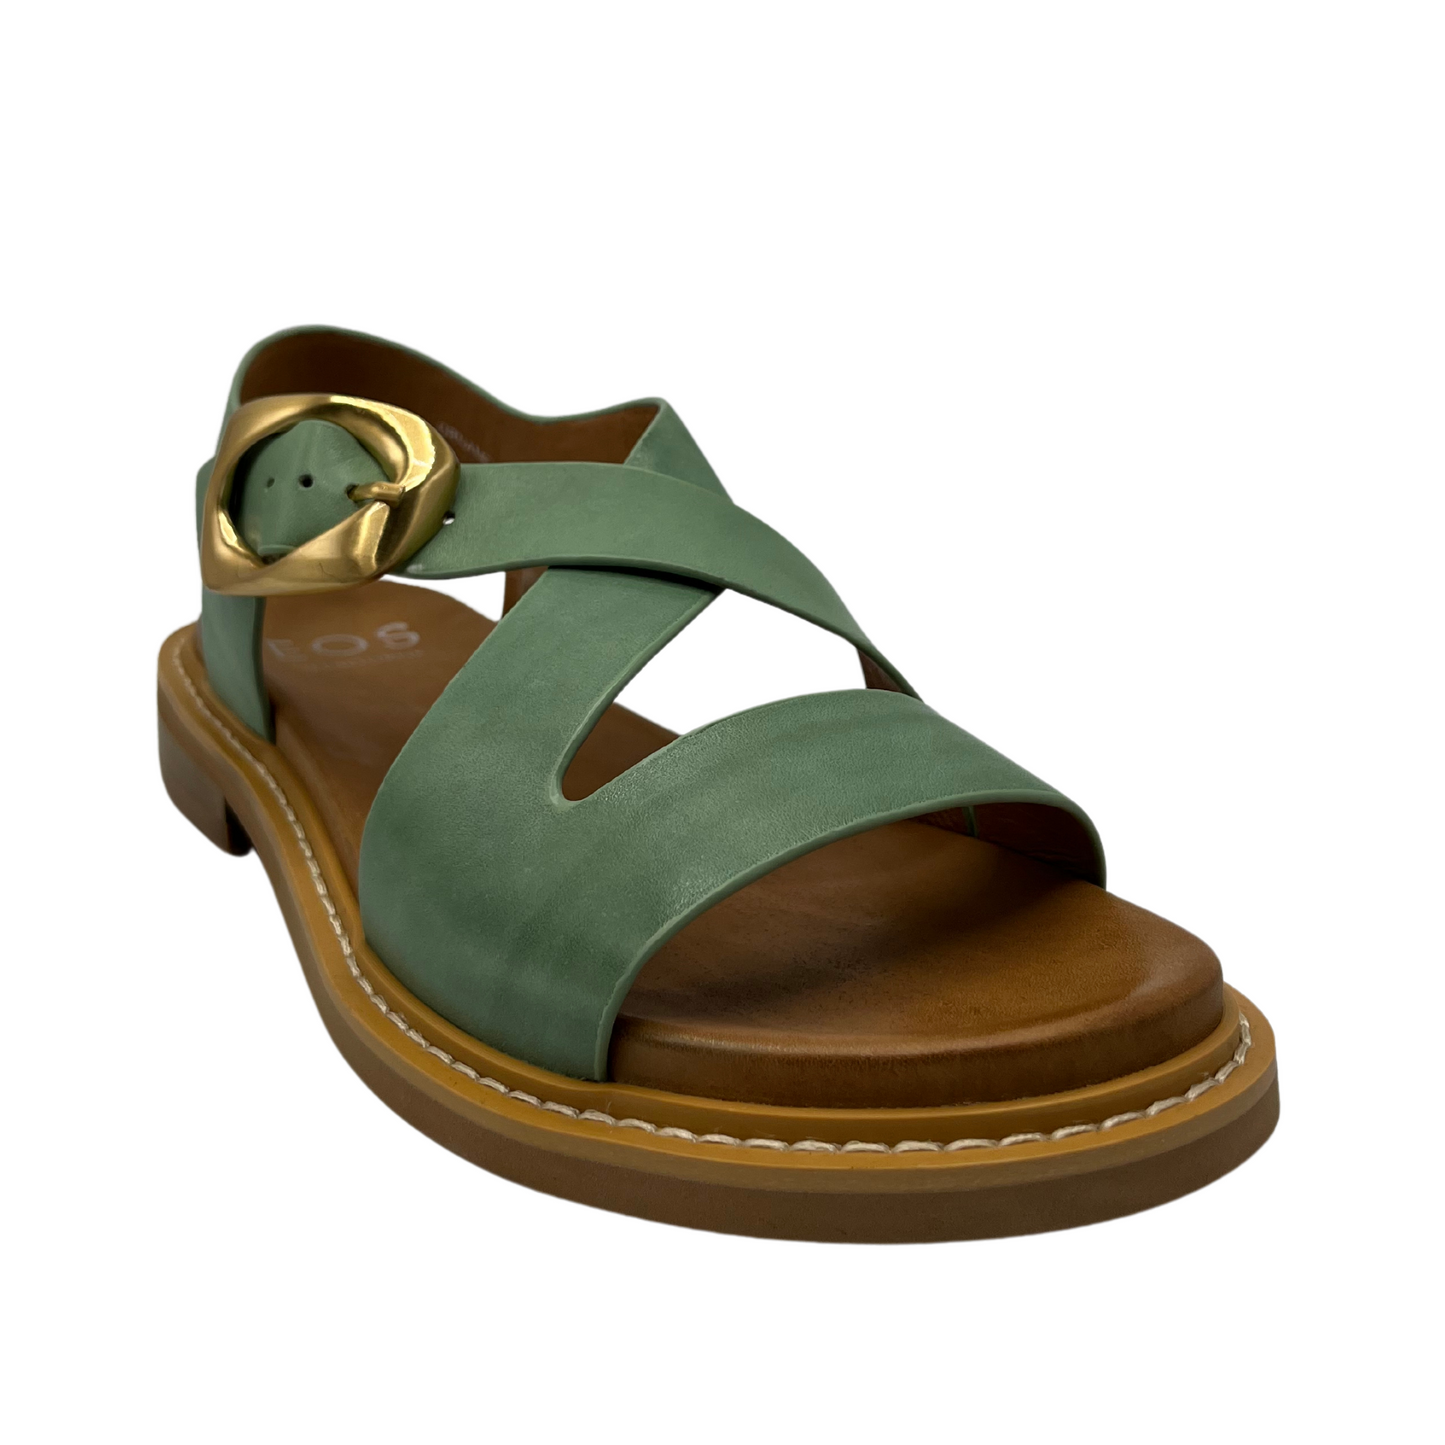 45 degree angled view of basil coloured leather sandals with gold pin buckle closure and low heel